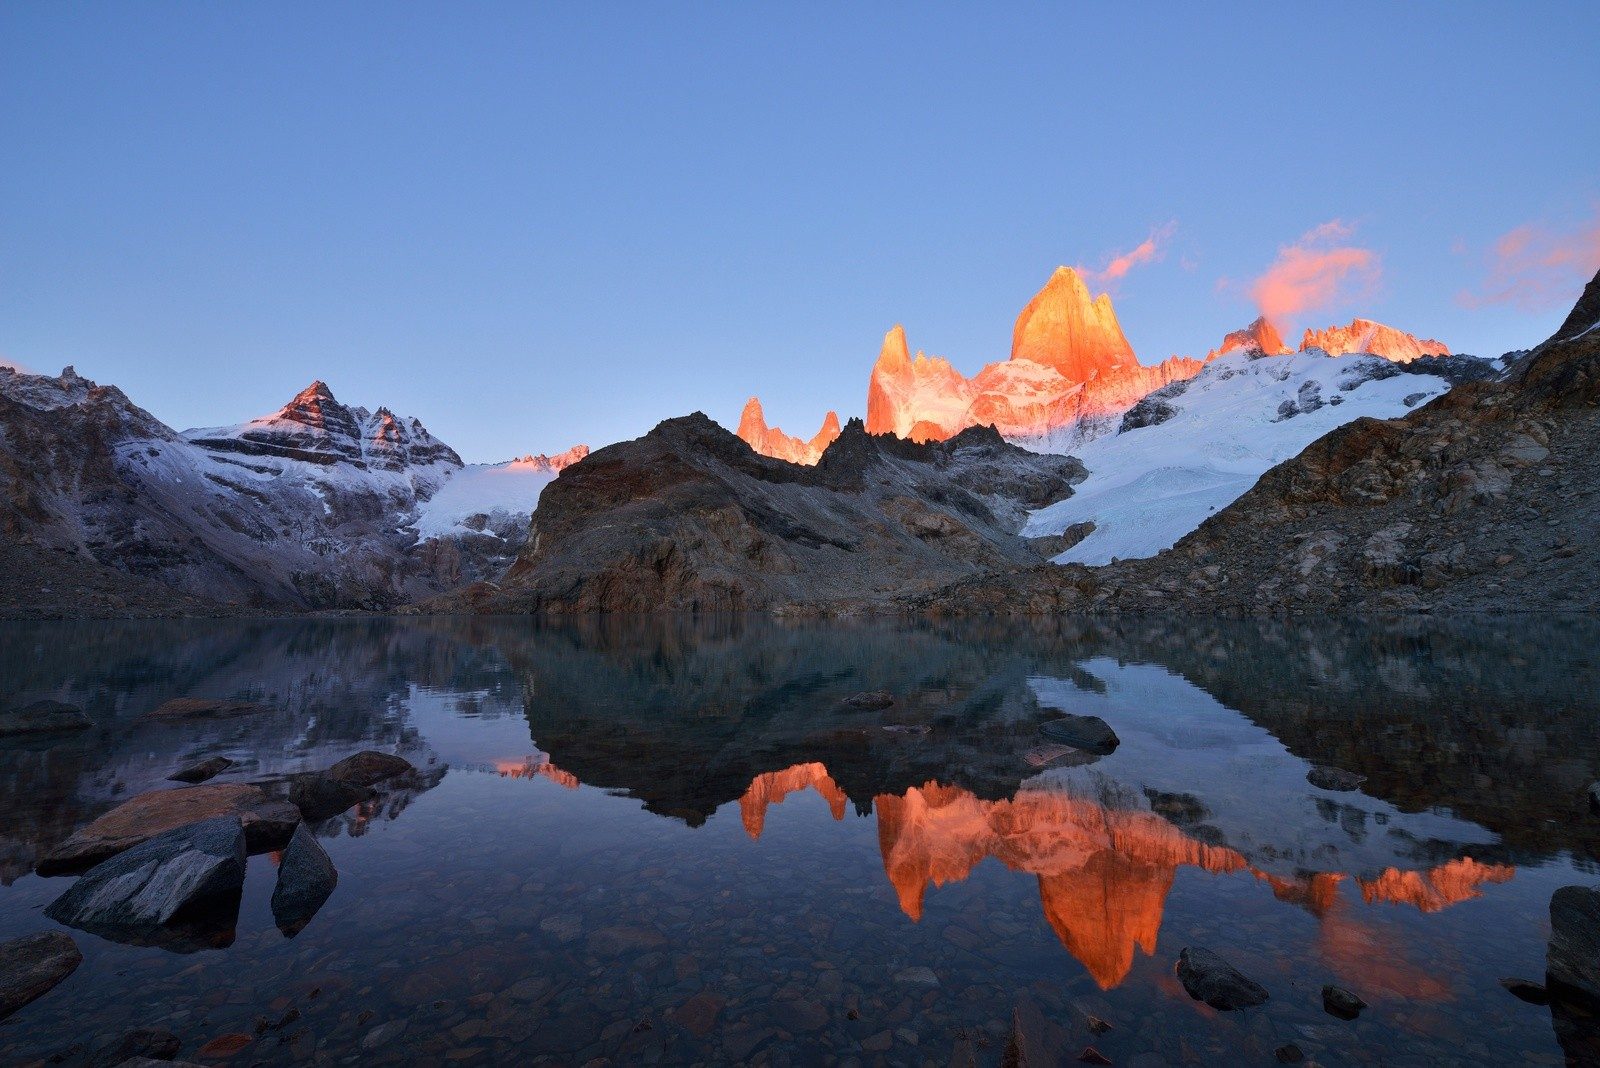 Torres del Paine, the rocks gleaming orange in the sunset.